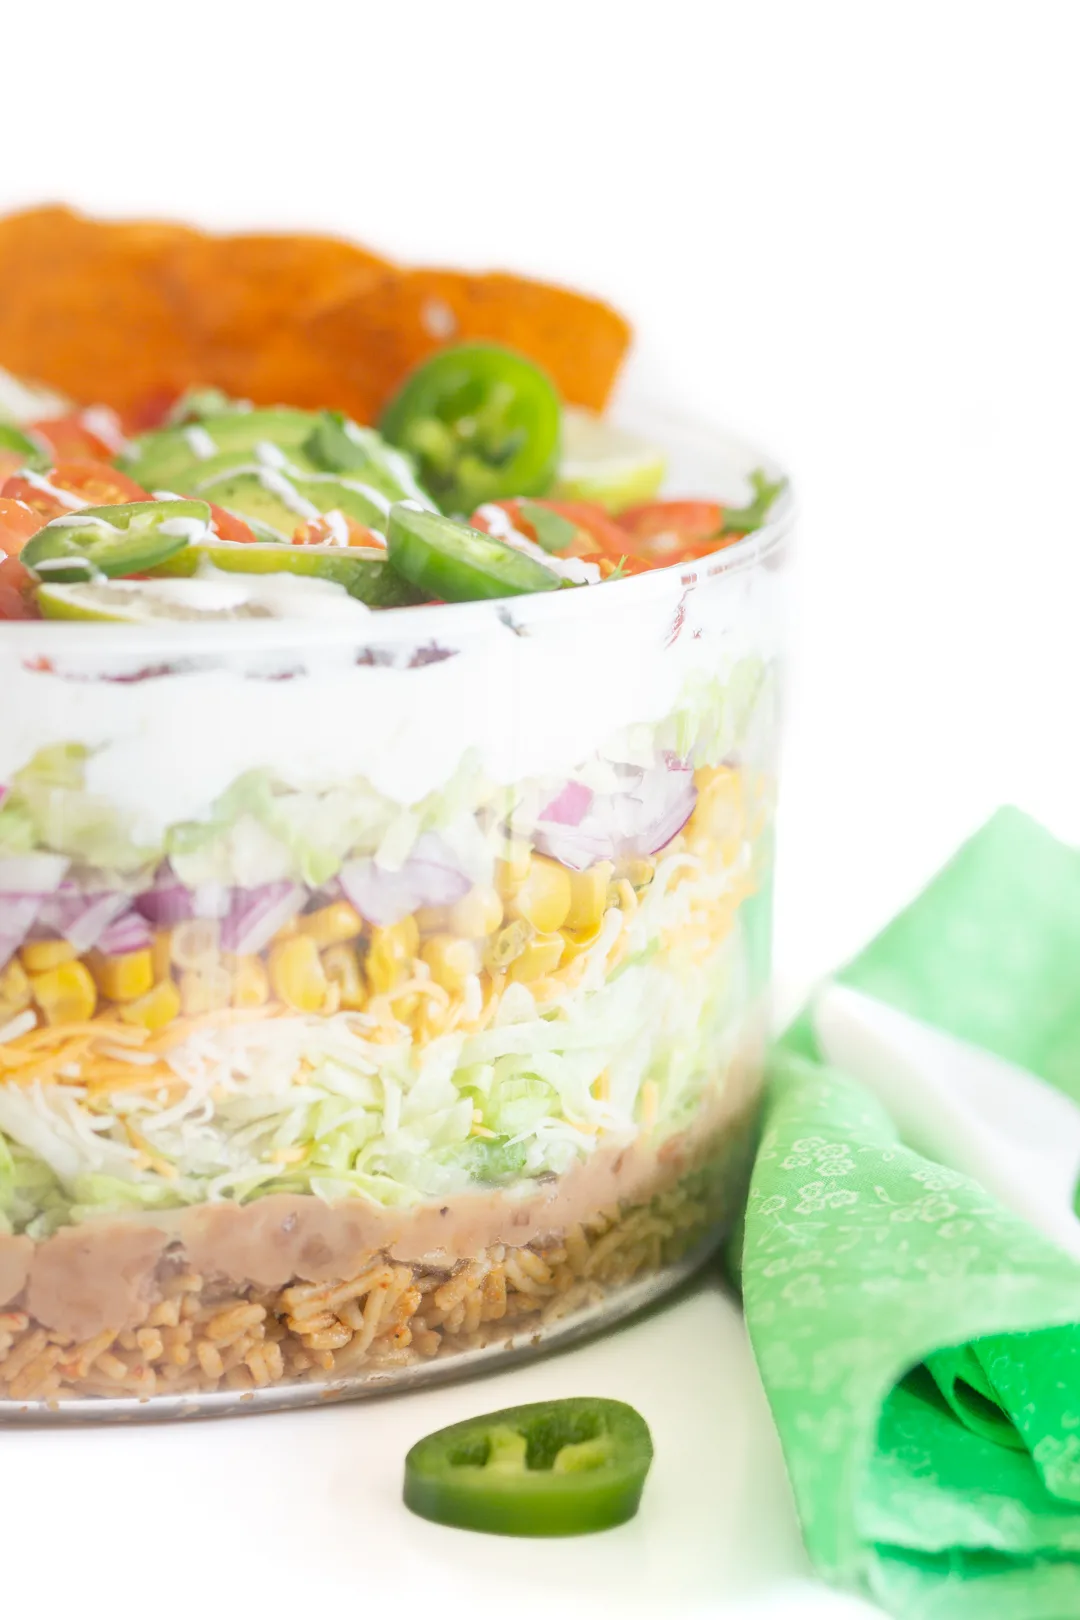 up close view of layers of salad in a glass serving bowl.